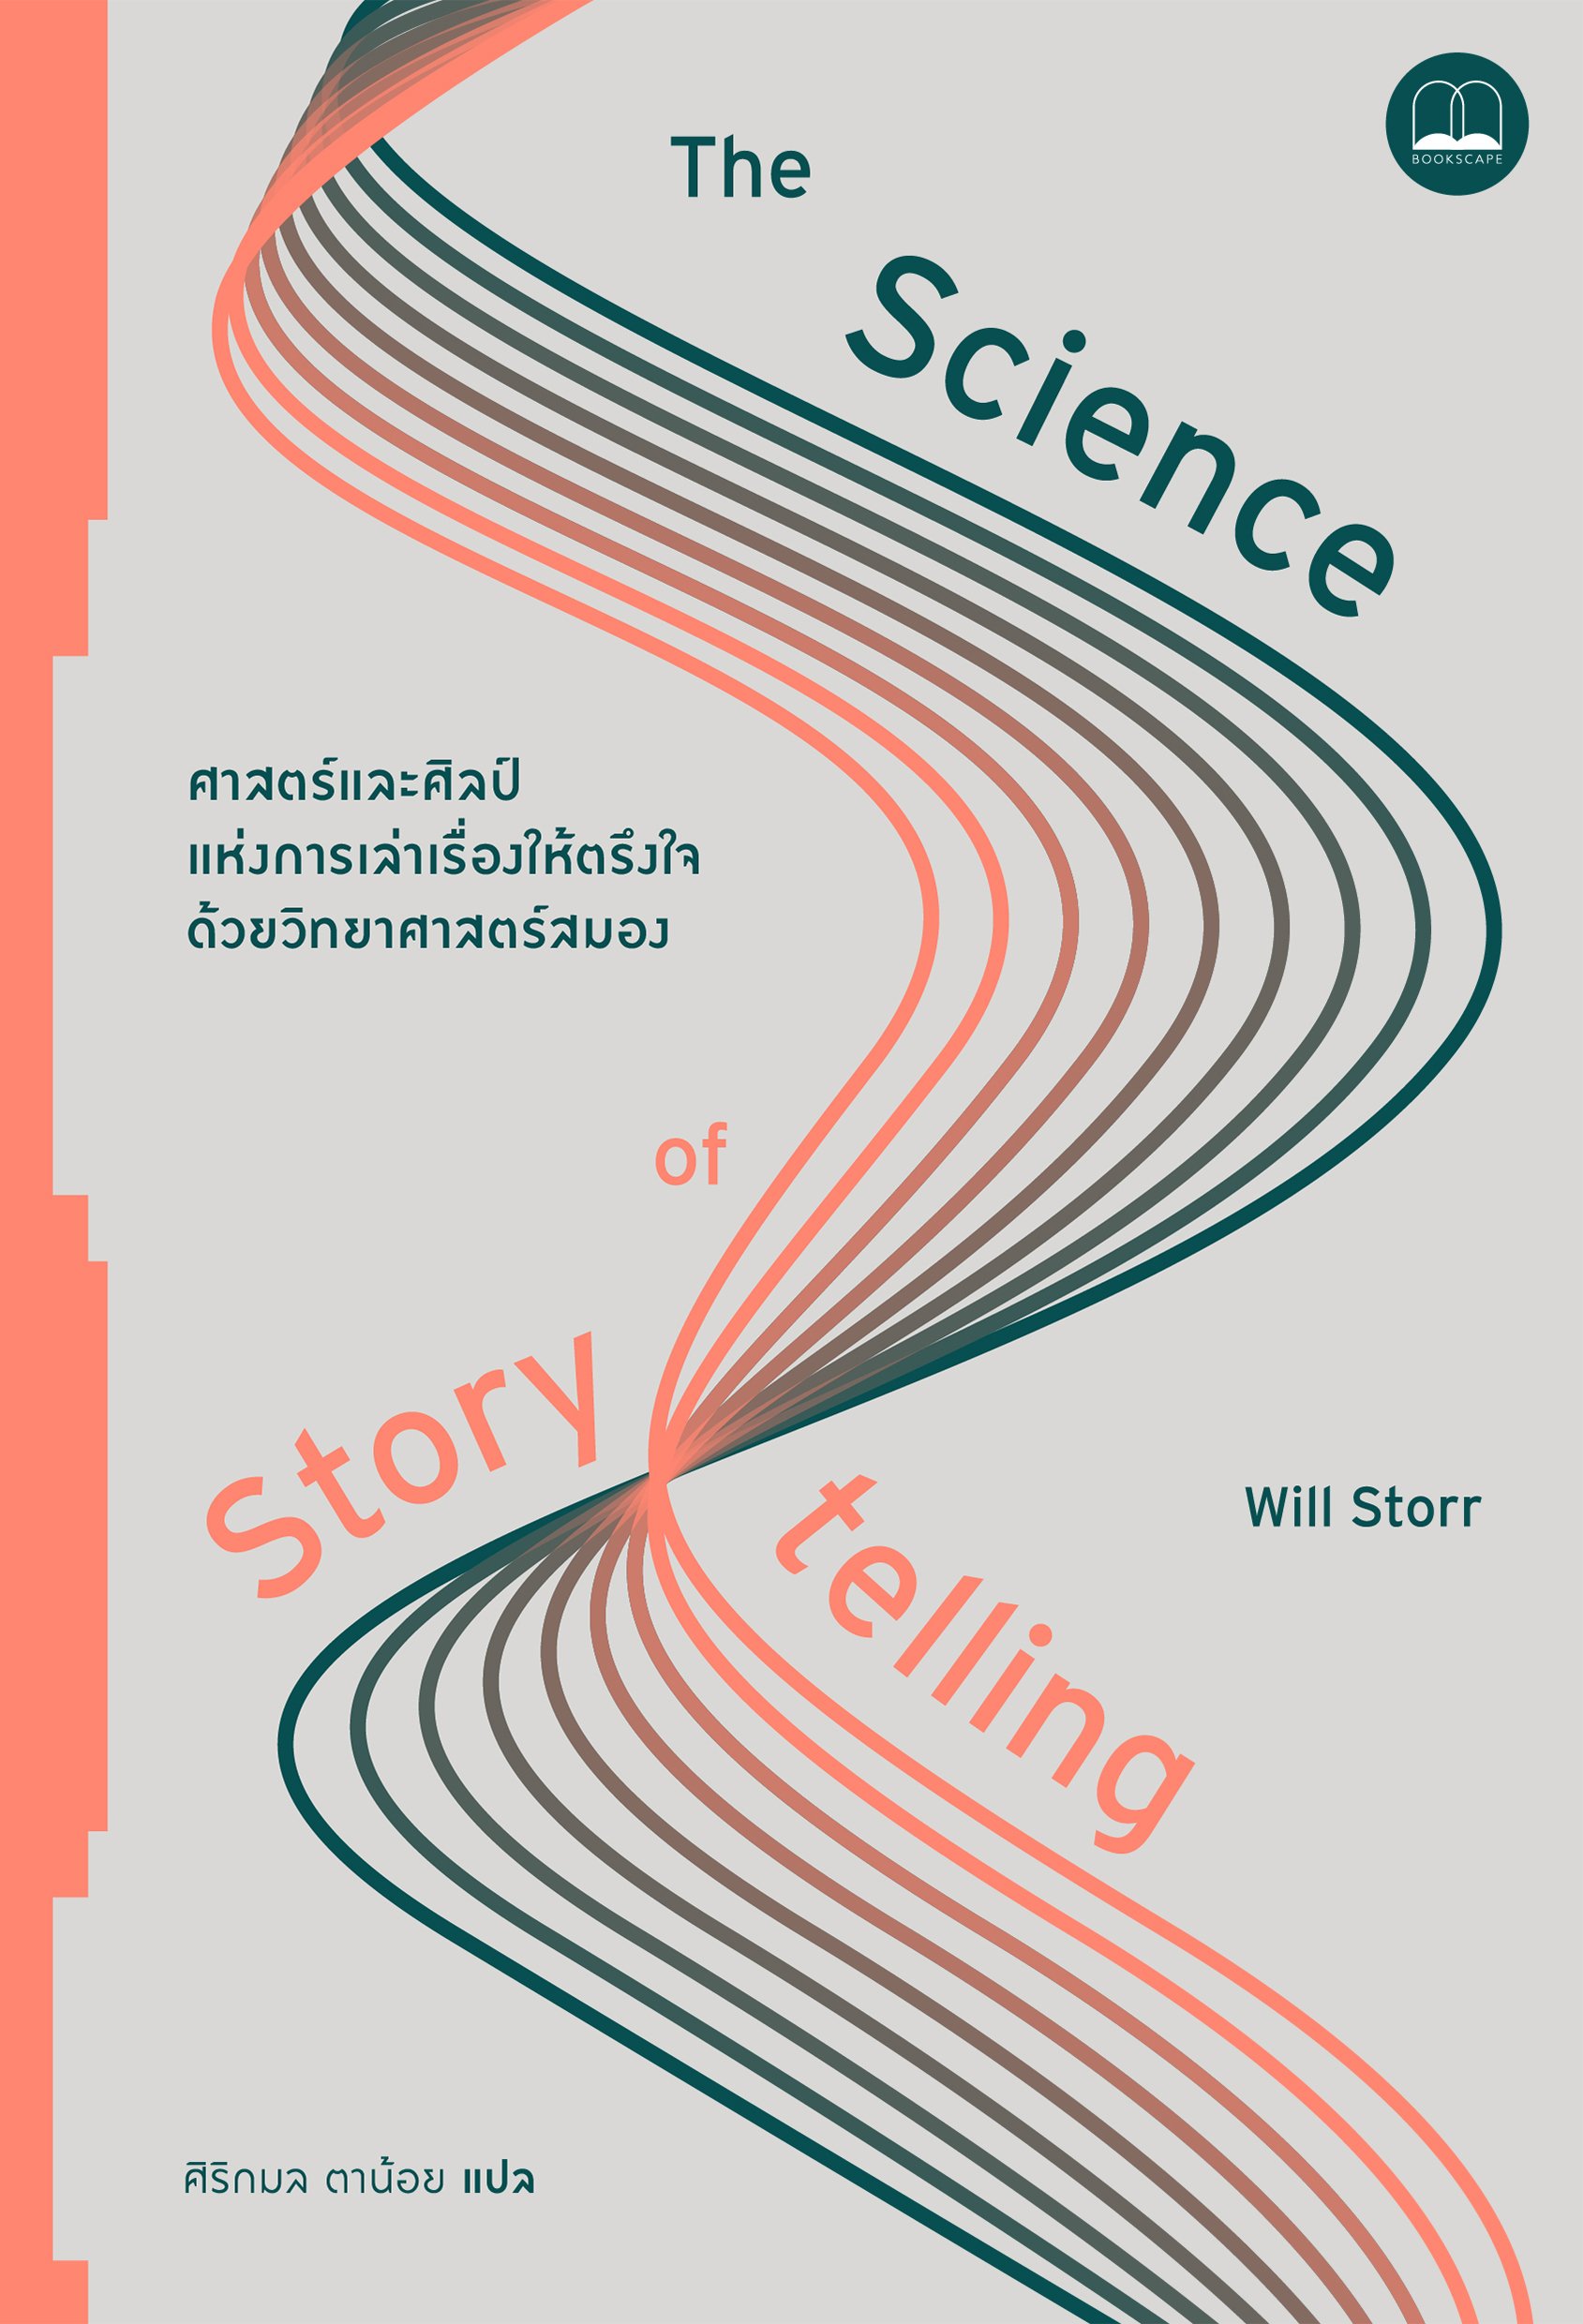 The Science of Storytelling / Will Storr / ศิริกมล ตาน้อย / Bookscape